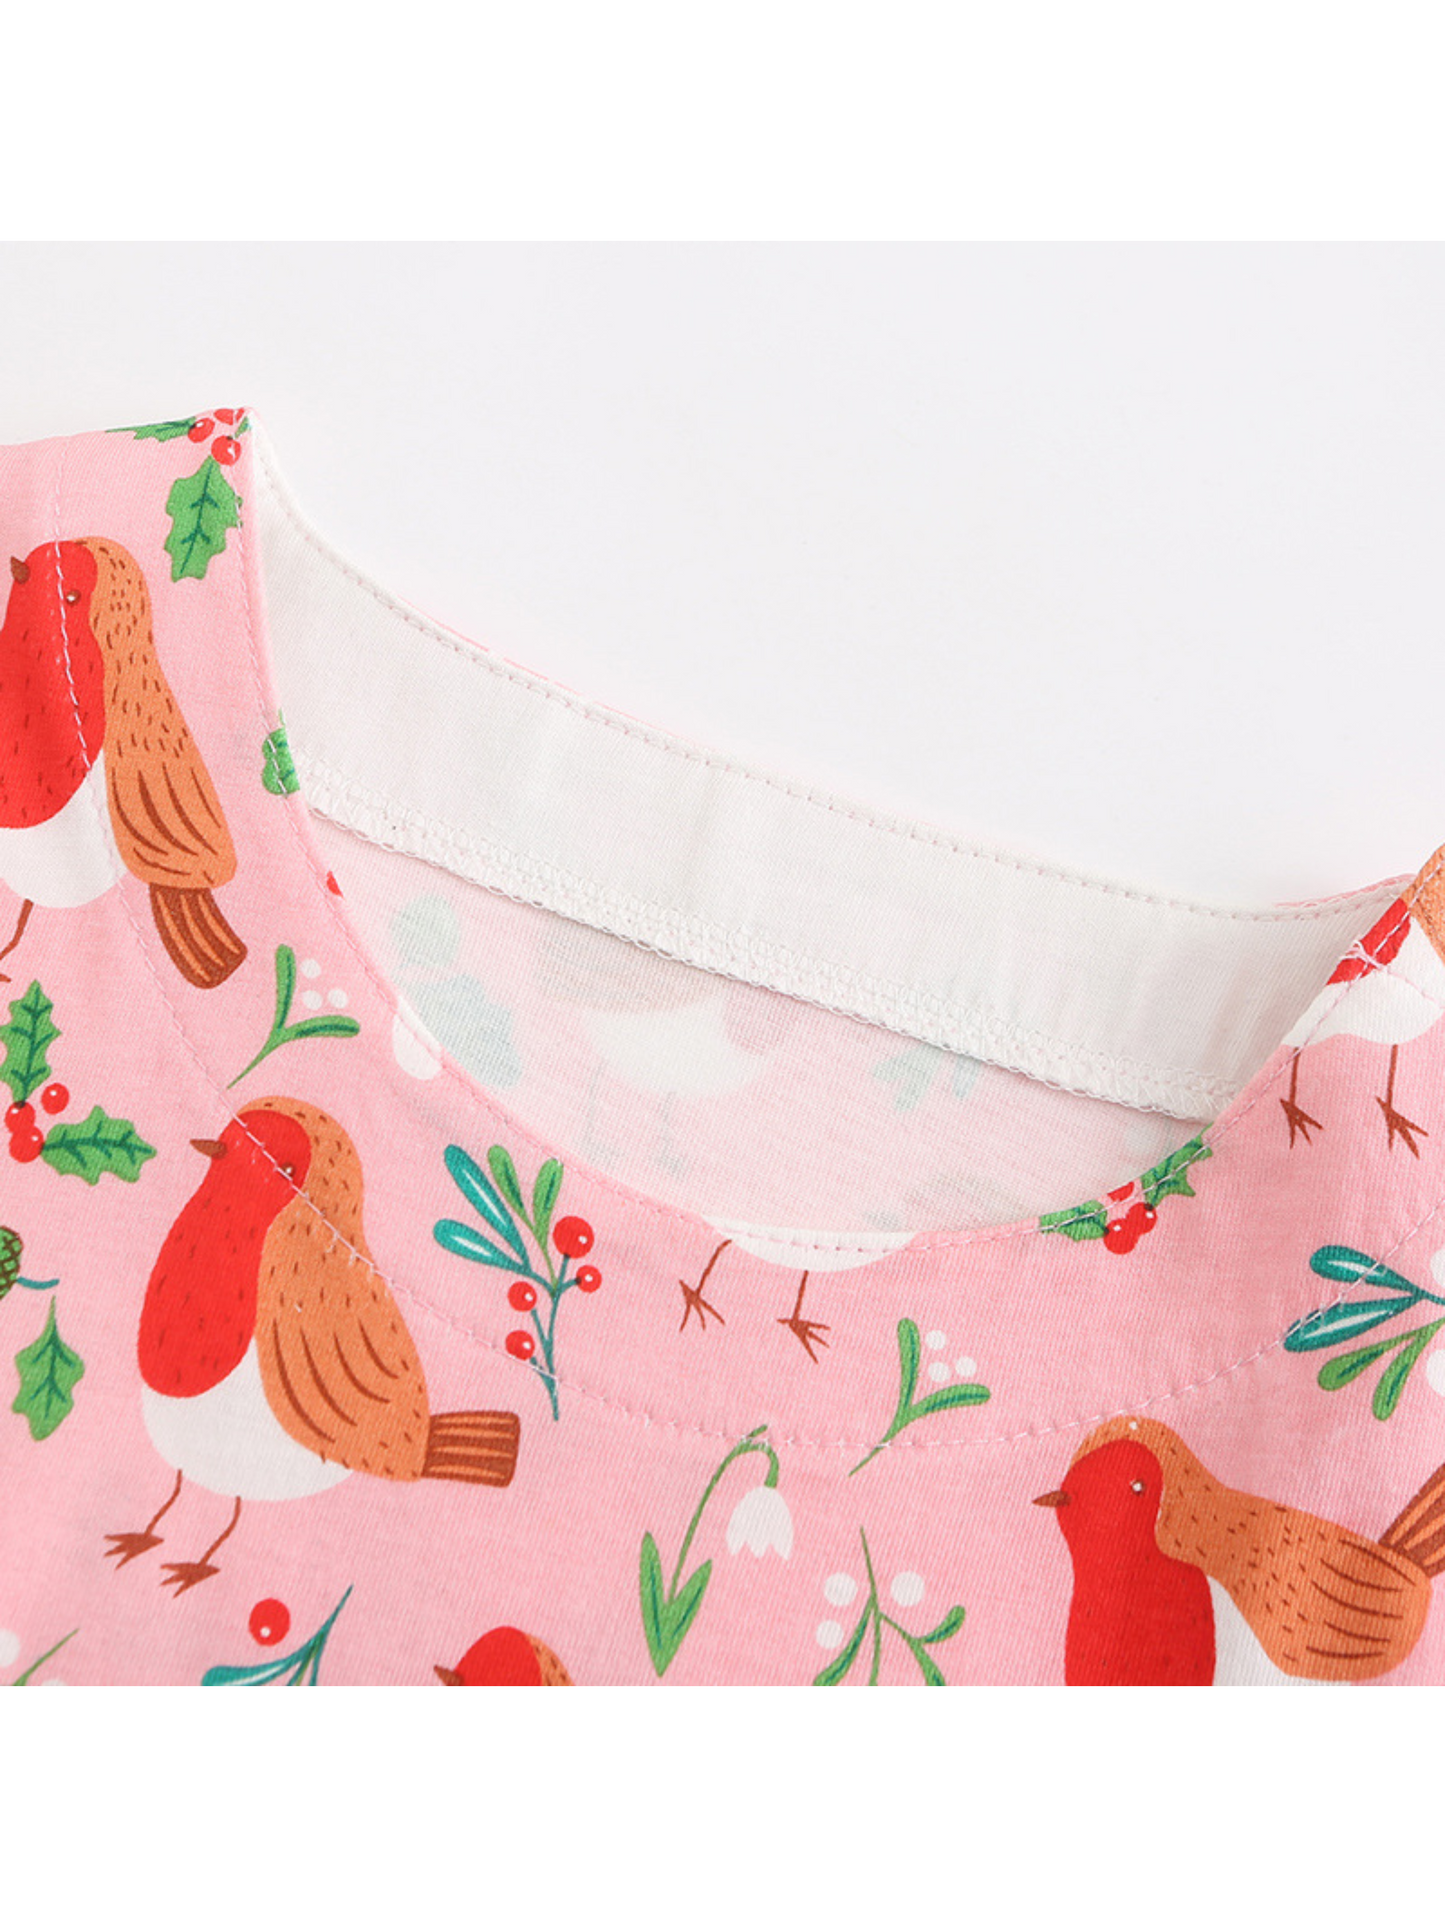 Bird And Mushroom Pink Dress (6 & 7 years old ONLY)